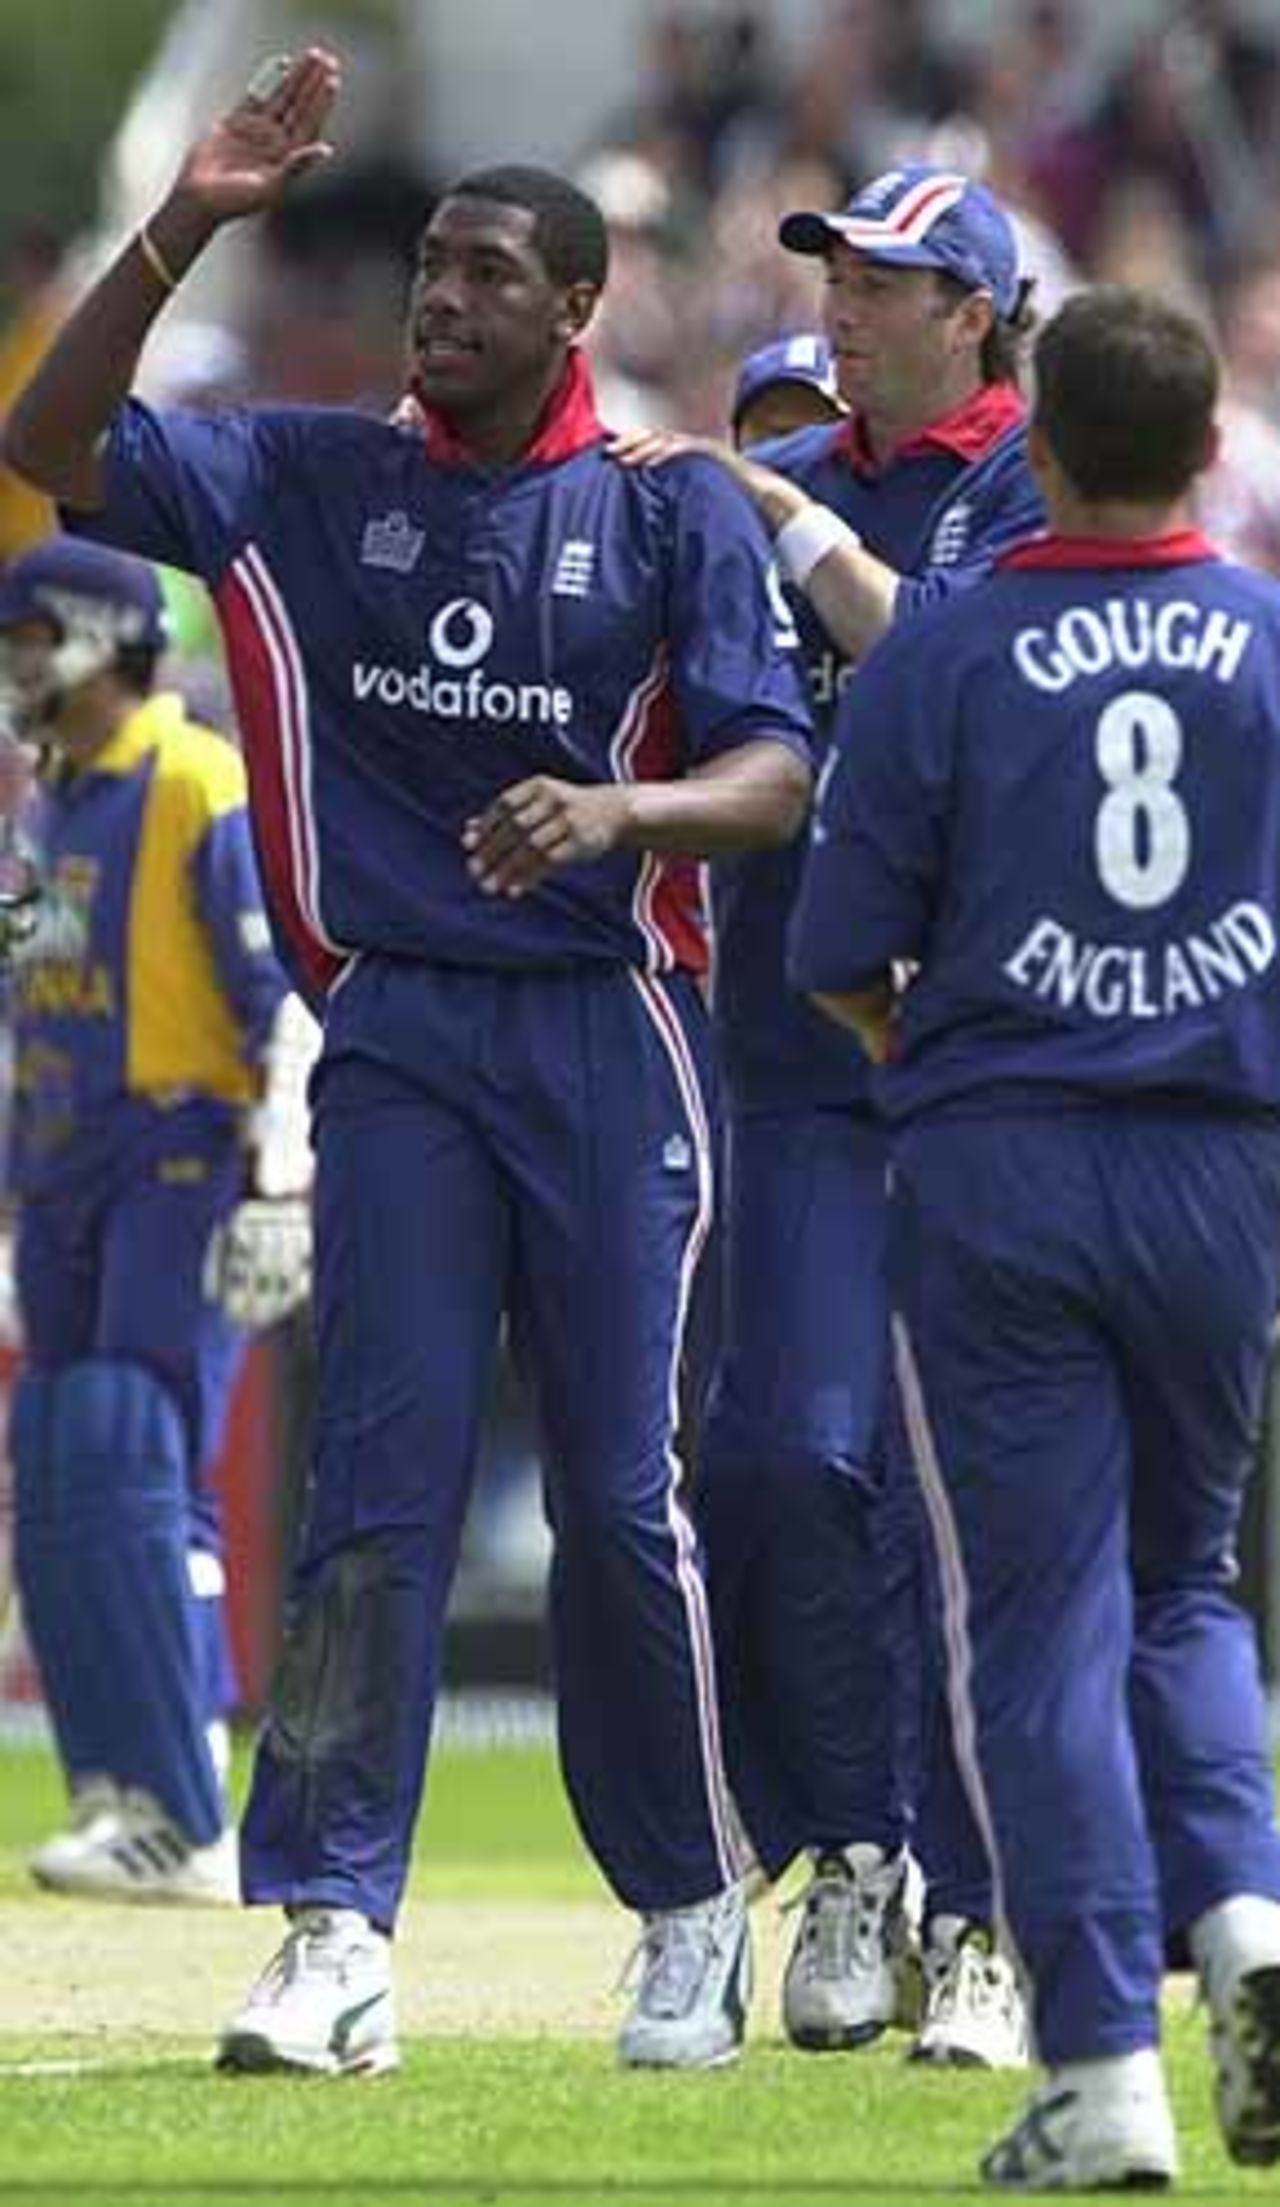 Alex Tudor has just got his first wicket in one day international cricket, England v Sri Lanka at Manchester, July 2002